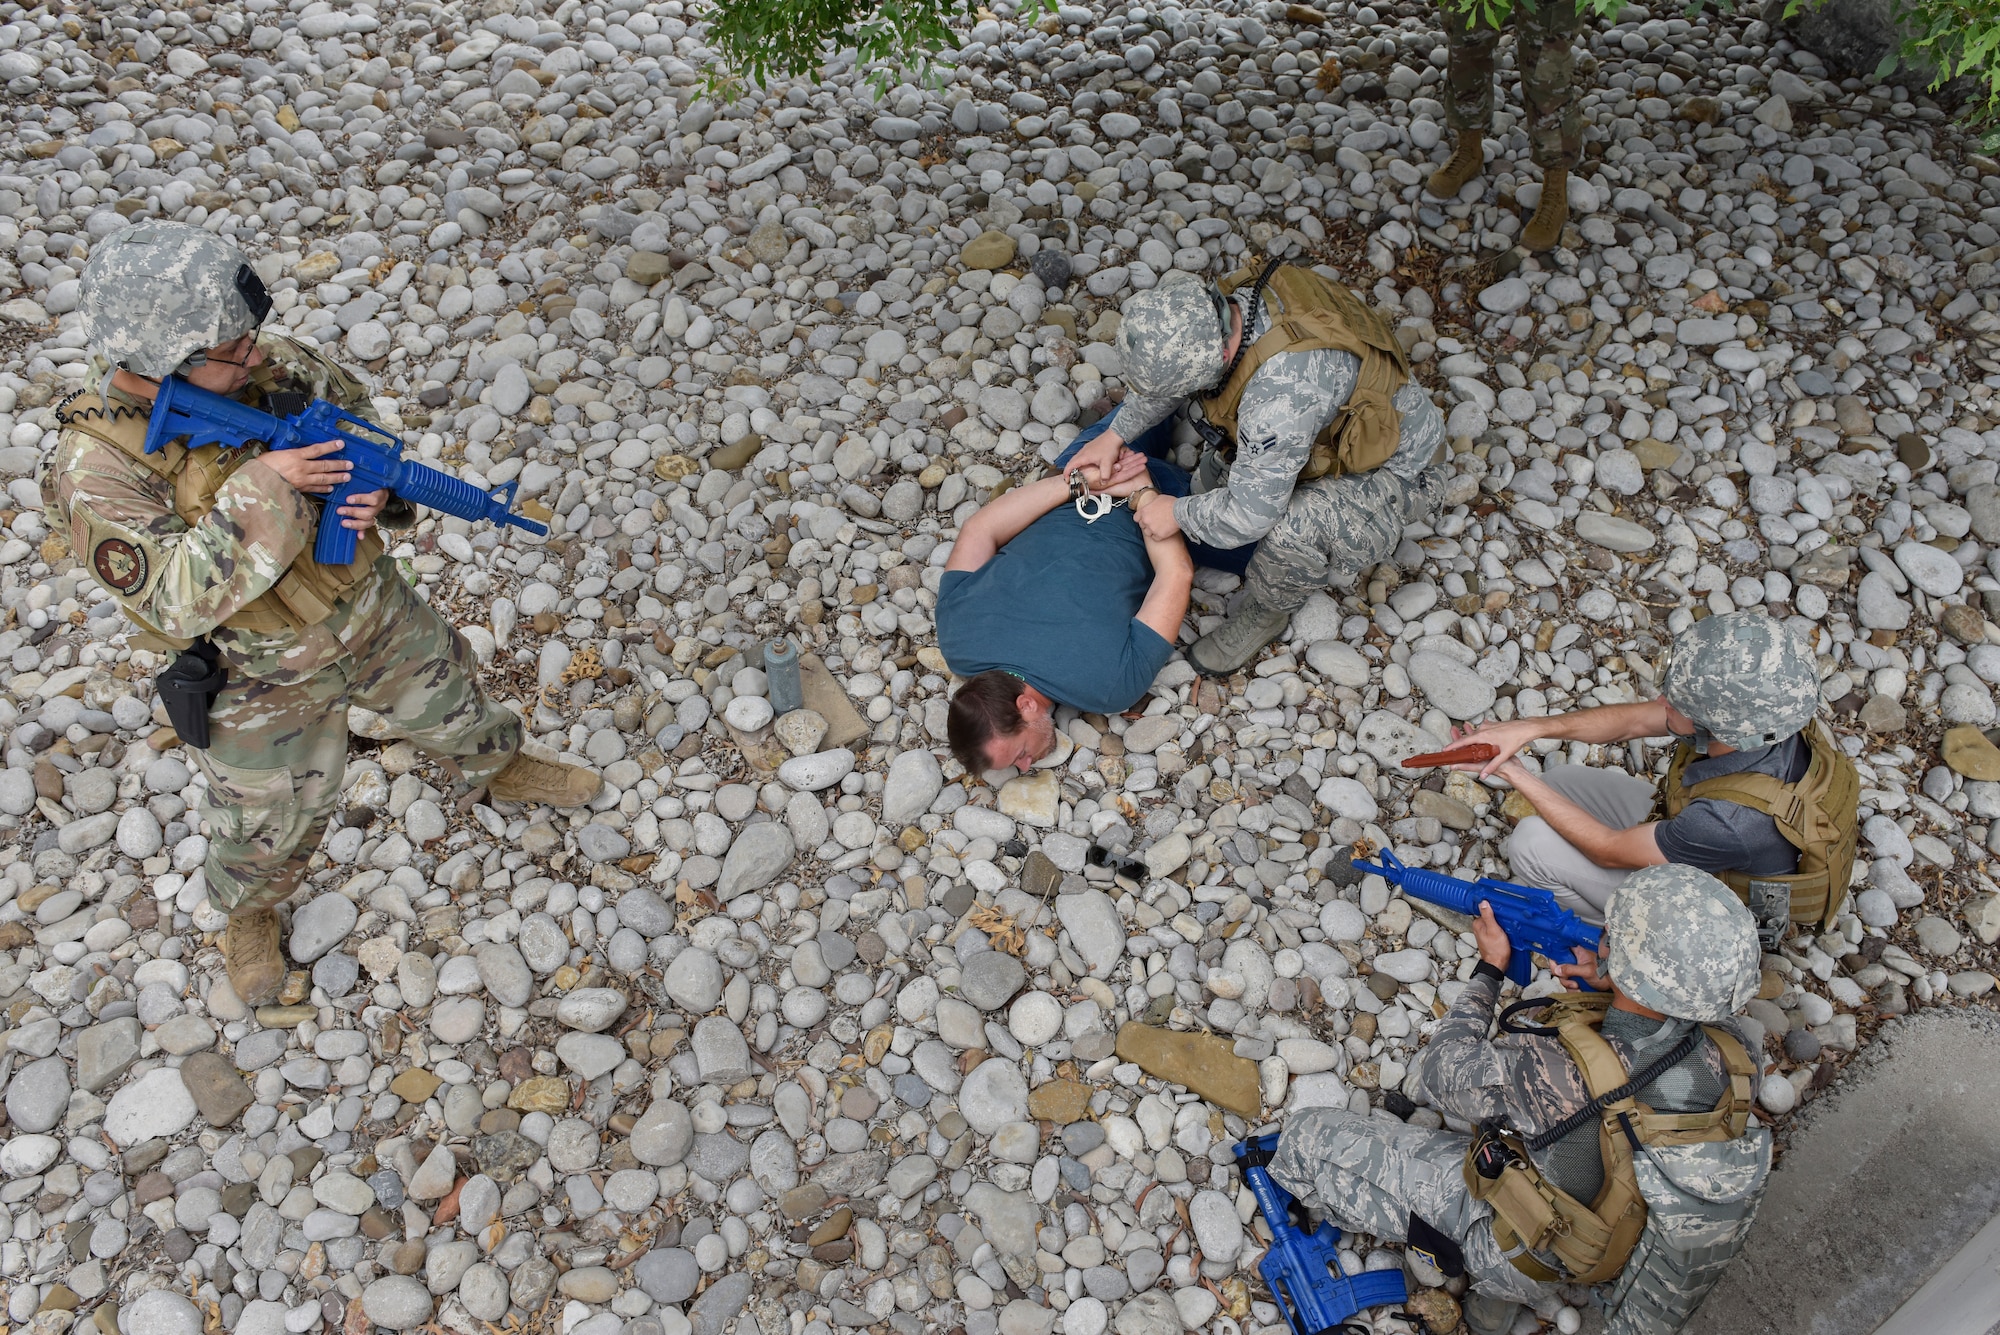 Members of the 47th Security Forces Squadron apprehend a simulated active shooter suspect during a training exercise at Laughlin Air Force Base, Texas, July 22, 2019. After negotiating, the defenders managed to bring down the pseudo suspect in a simulated hostage situation. The exercise was aimed at bolstering crisis readiness and response capabilities. (U.S. Air Force photo by Staff Sgt. Benjamin N. Valmoja)